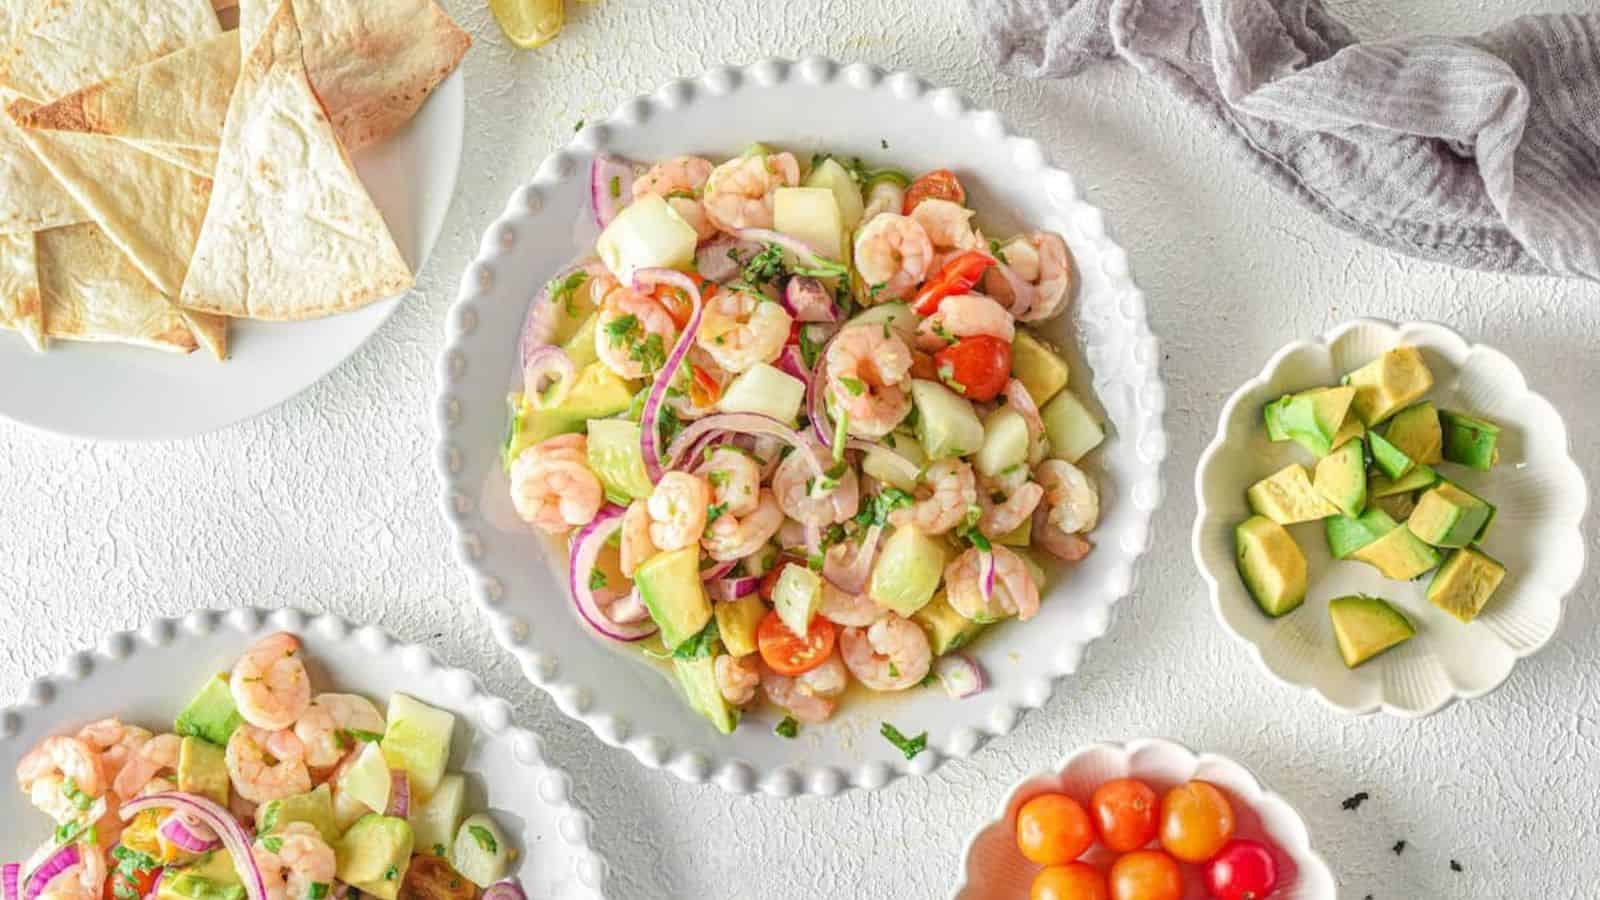 A plate of shrimp ceviche with tomatoes, cucumbers, and tortilla chips.